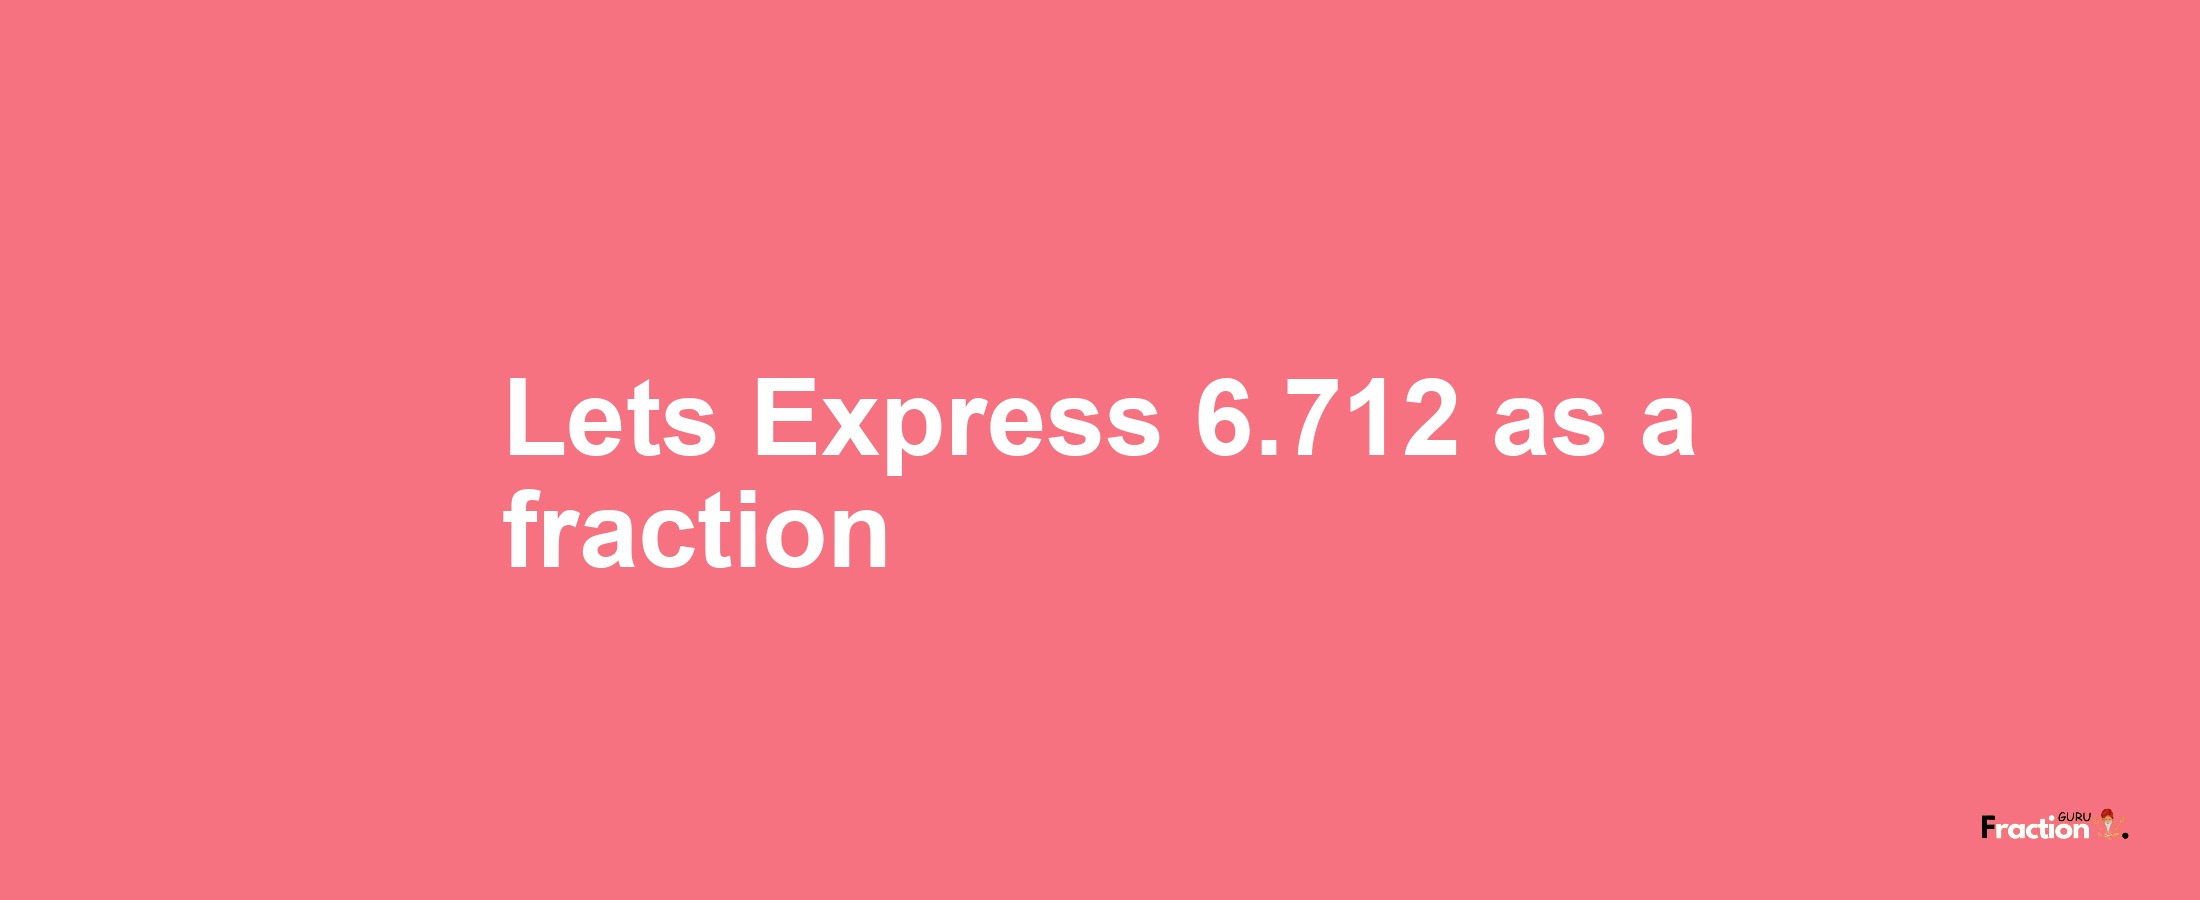 Lets Express 6.712 as afraction